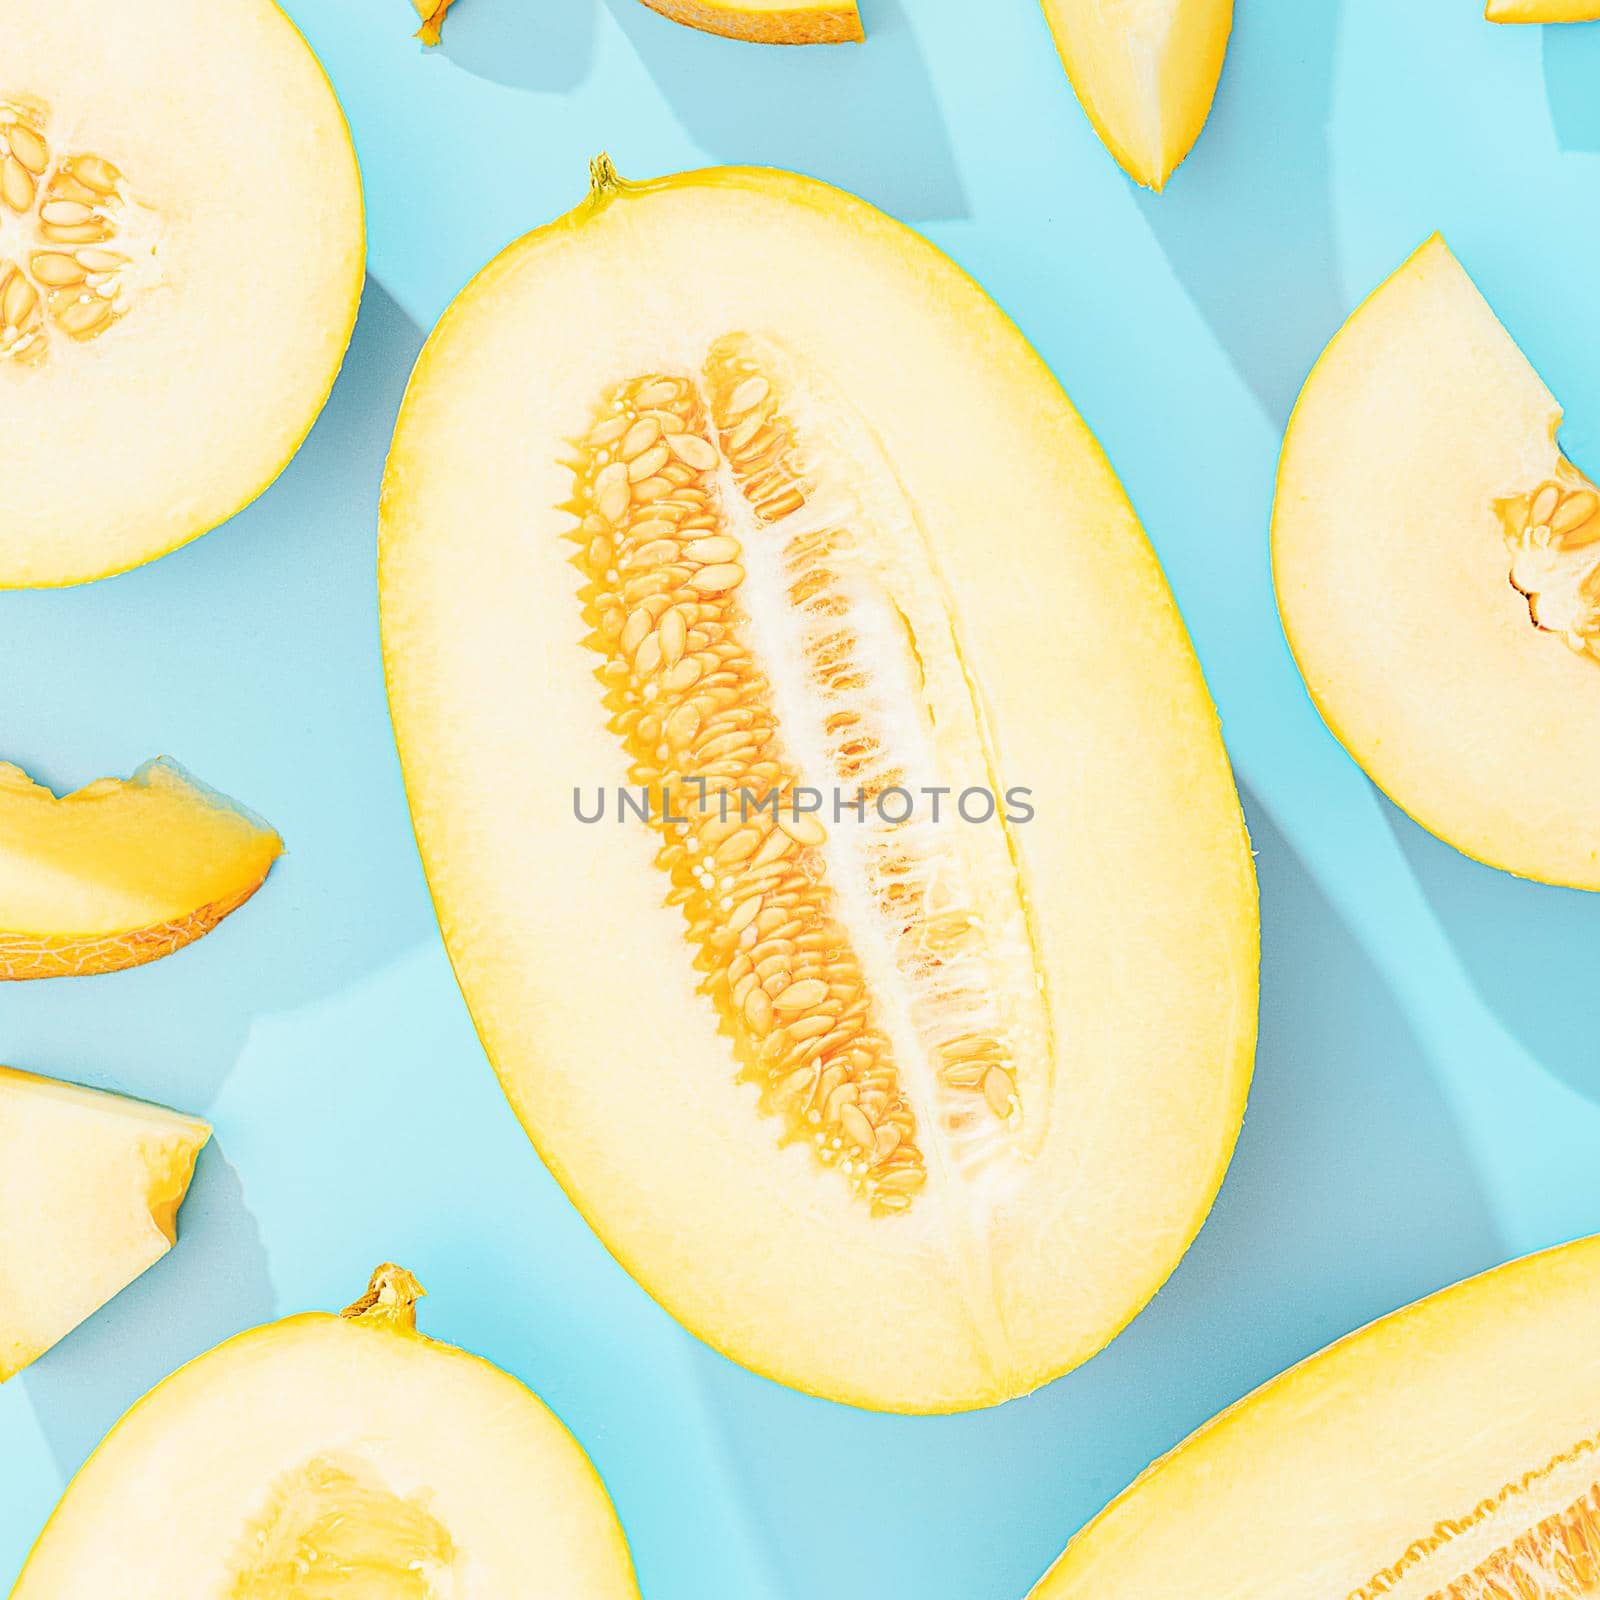 background with melon. sliced sweet and ripe melon on a blue background.